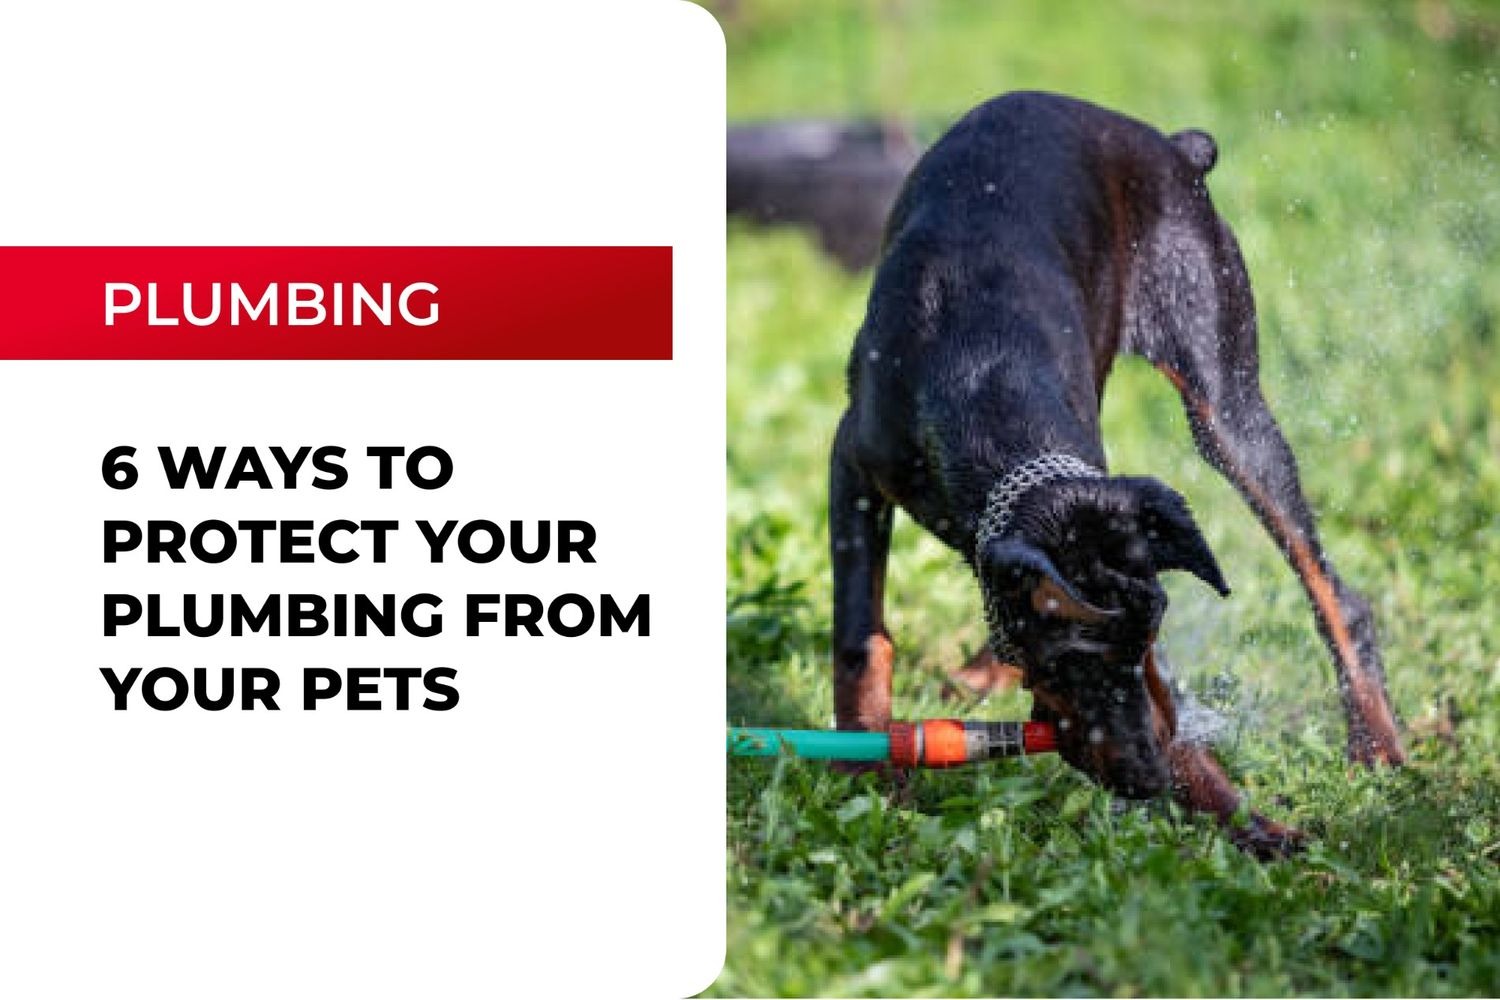 6 Ways to Protect Your Plumbing from Your Pets